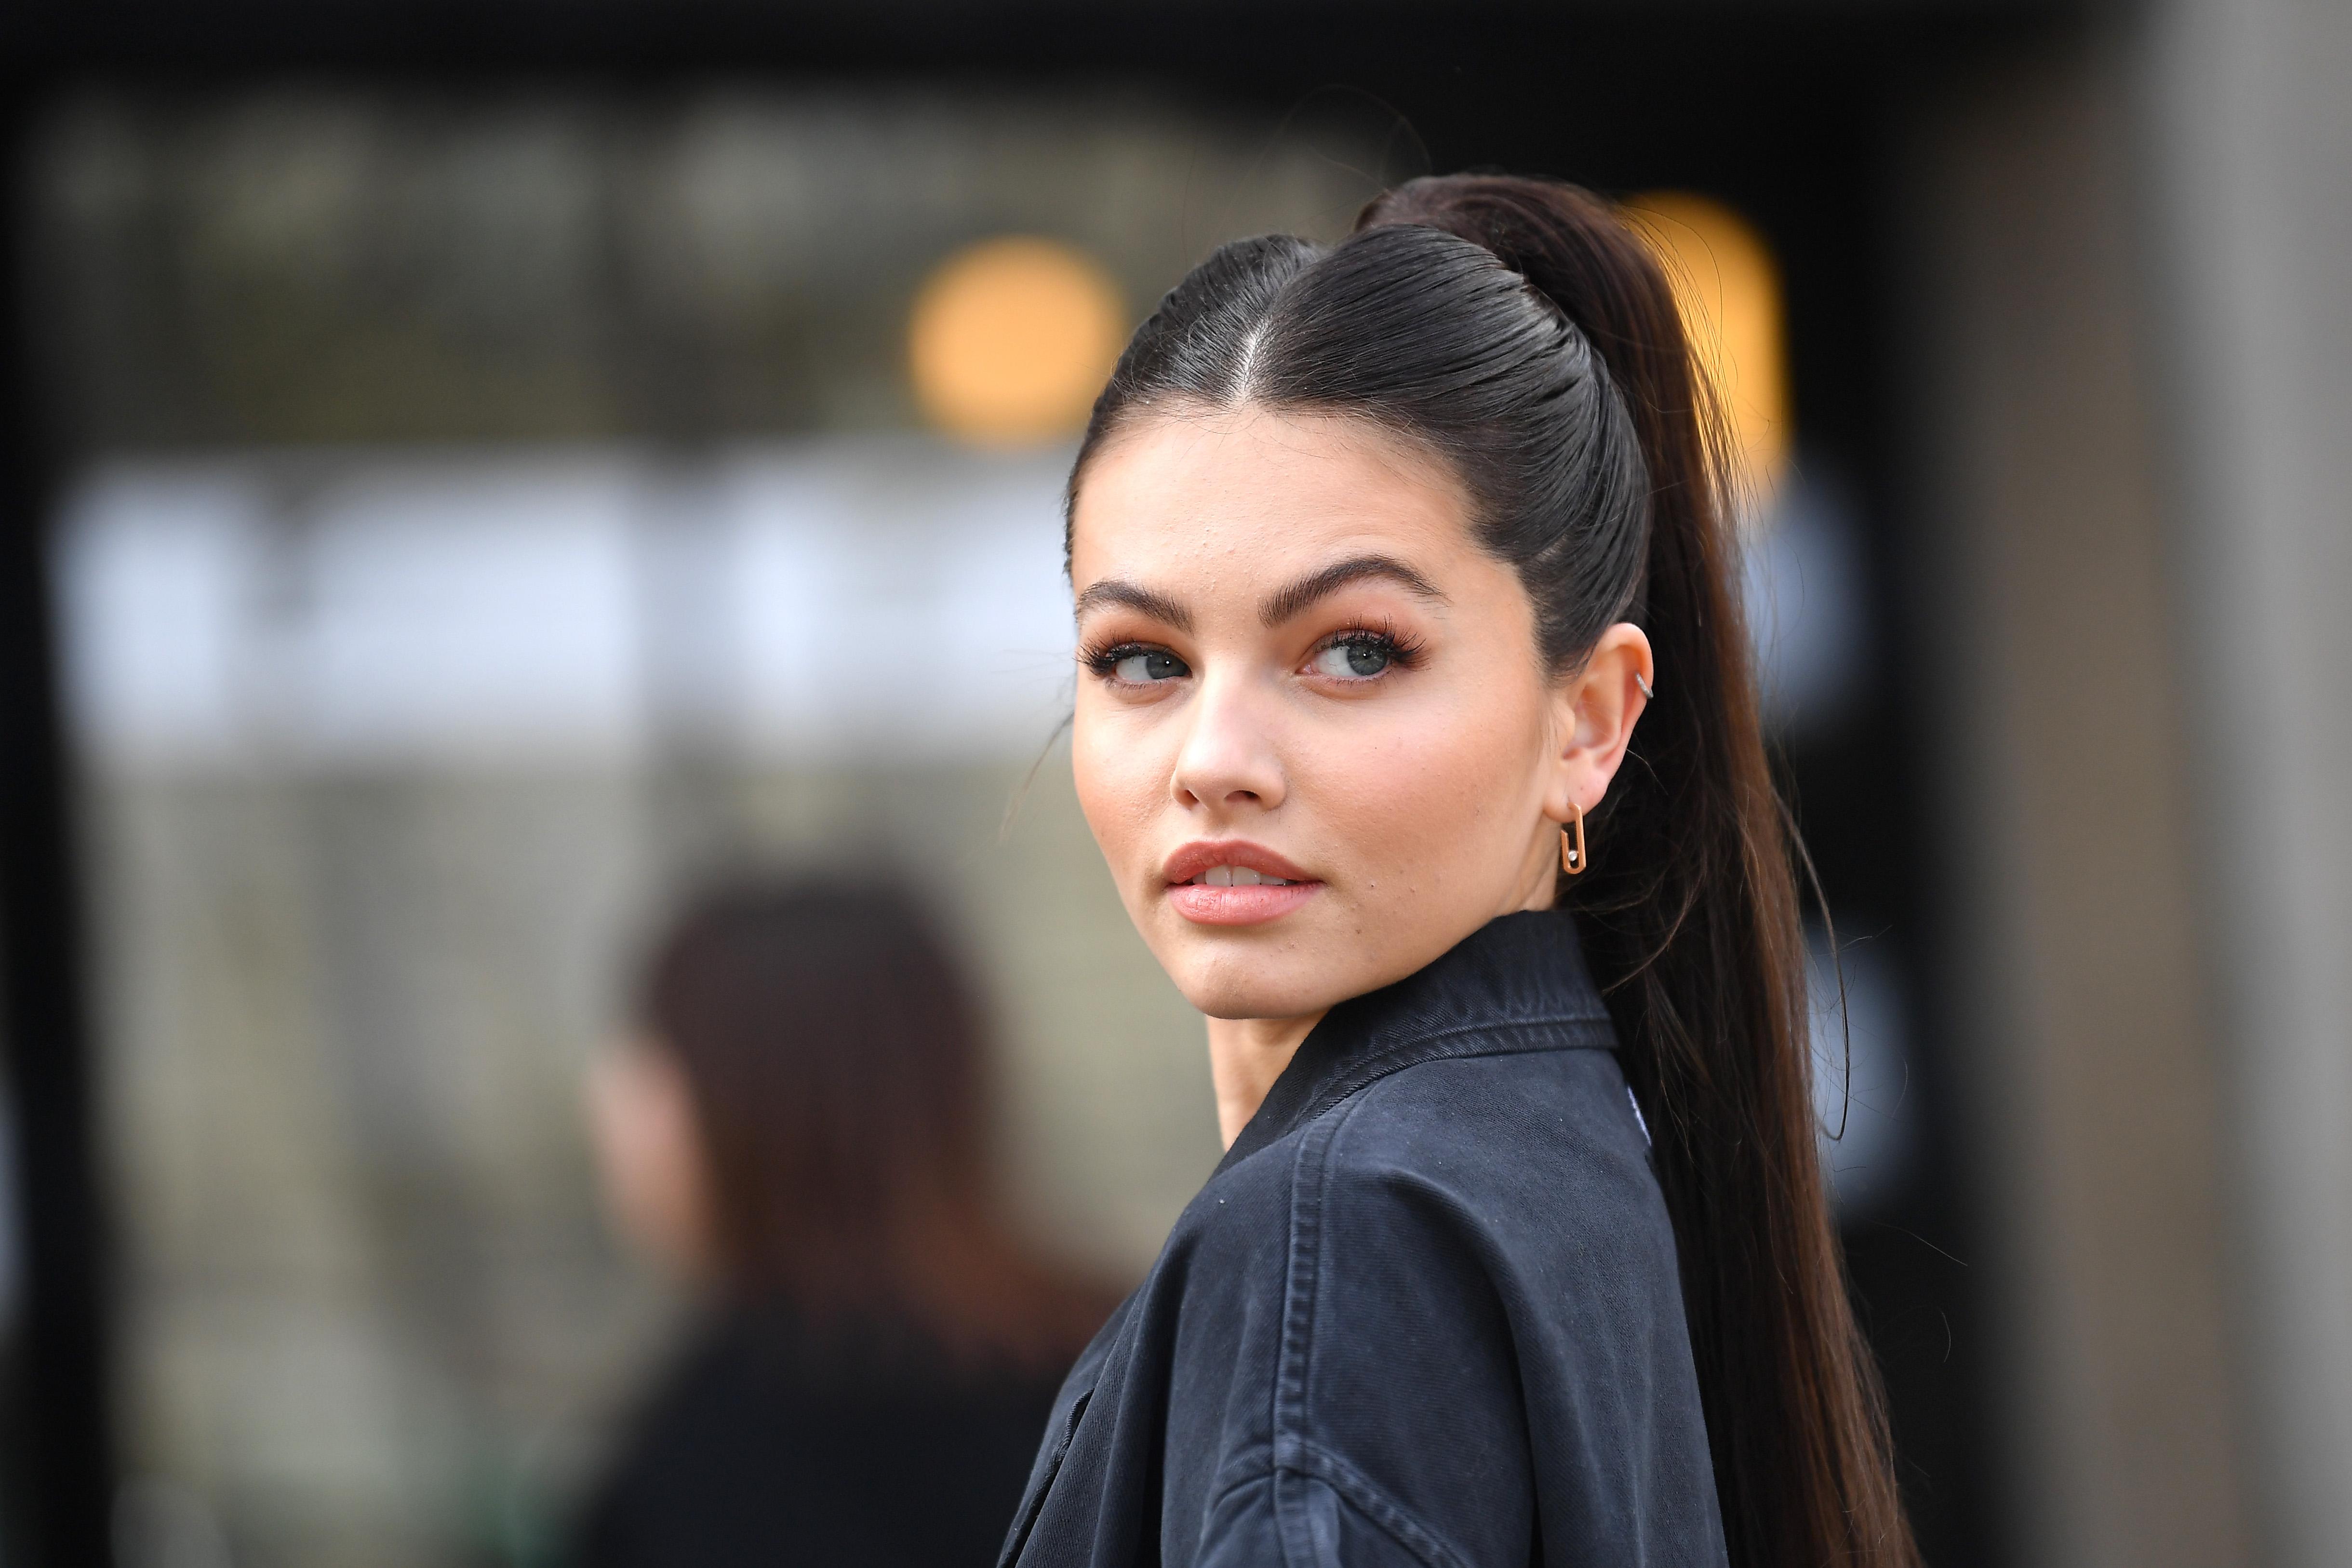 ‘World’s Most Beautiful Girl’ Thylane Blondeau Goes Braless In Basketball Shorts For Indoor Sunbathing Session